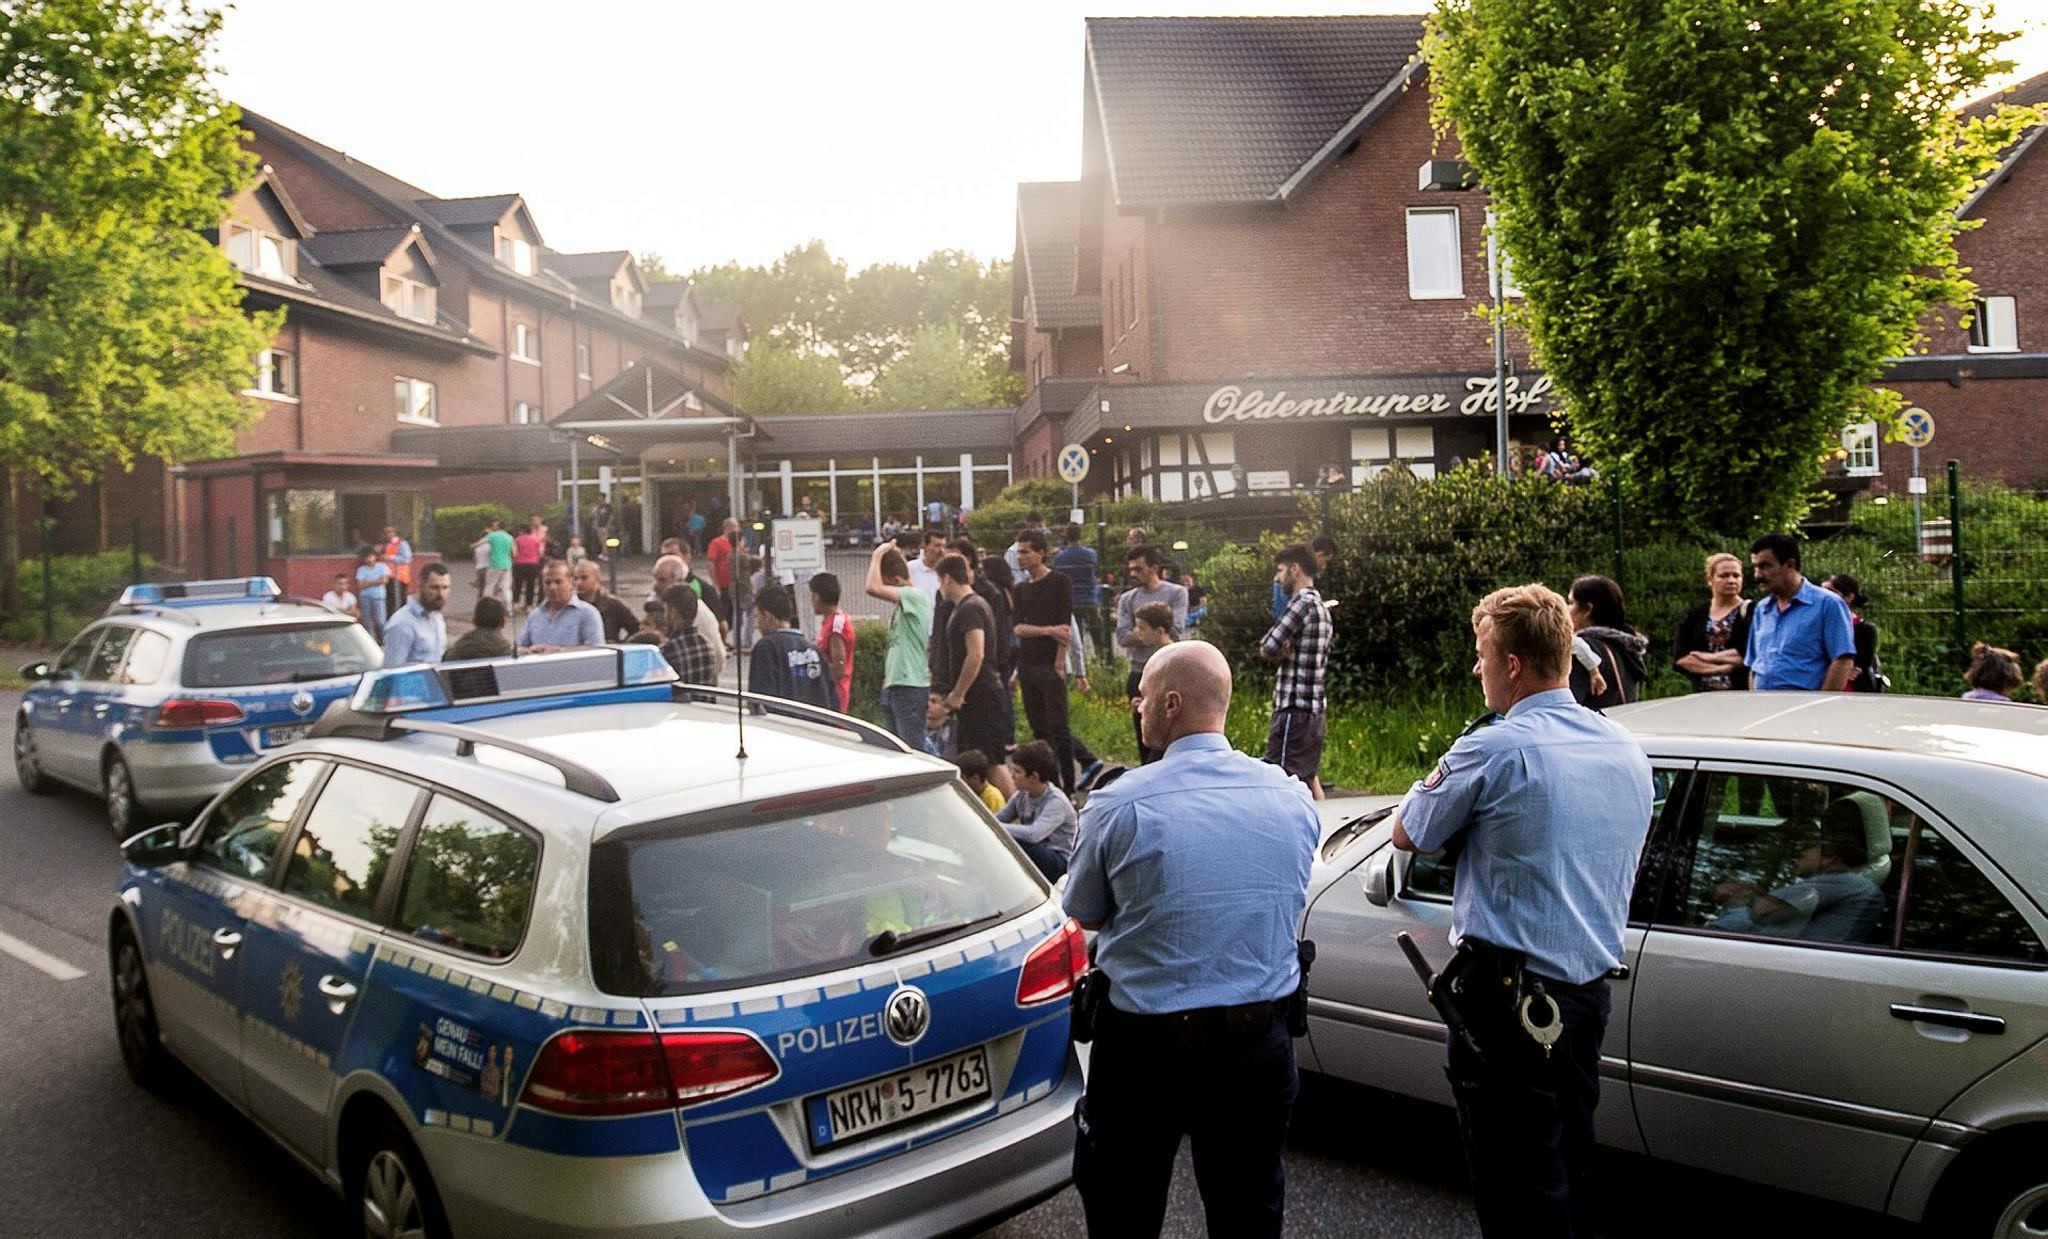  police and refugees stand near a refugee shelter in Bielefeld, Germany. (AP Photo)